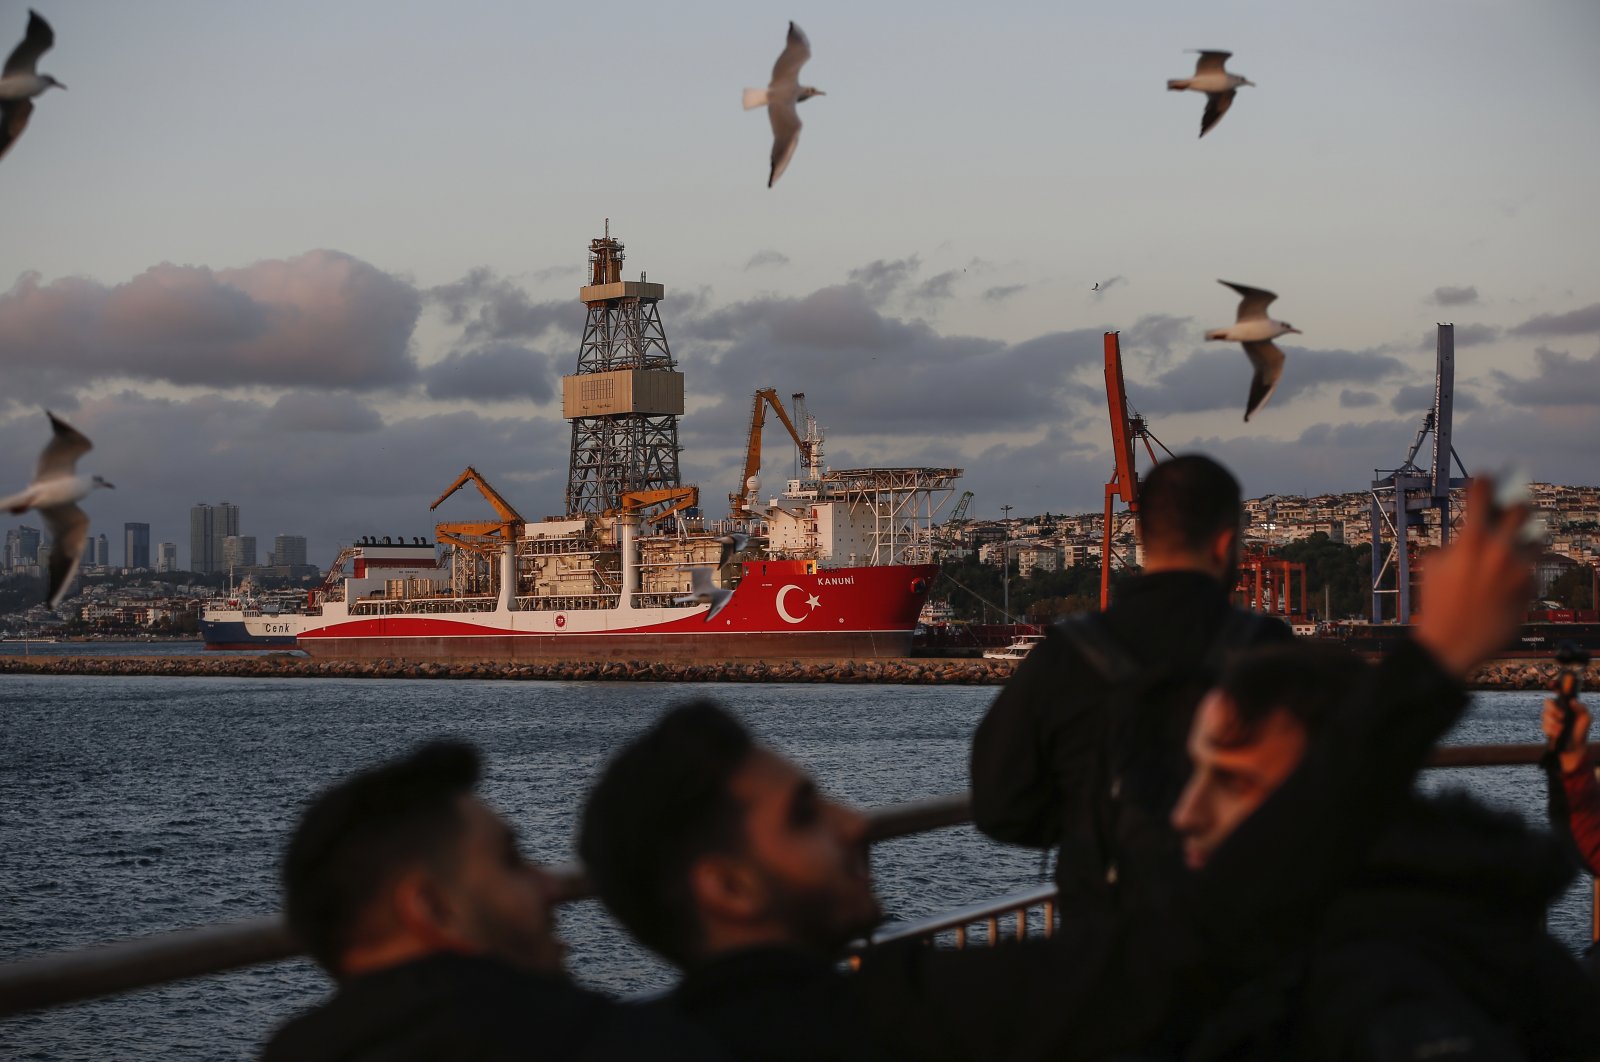 Turkish drilling ship Kanuni is seen docked for maintenance before heading to the Black Sea for drilling operations, at the port of Haydarpaşa in Istanbul, Wednesday, Oct. 21, 2020.  (AP File Photo)